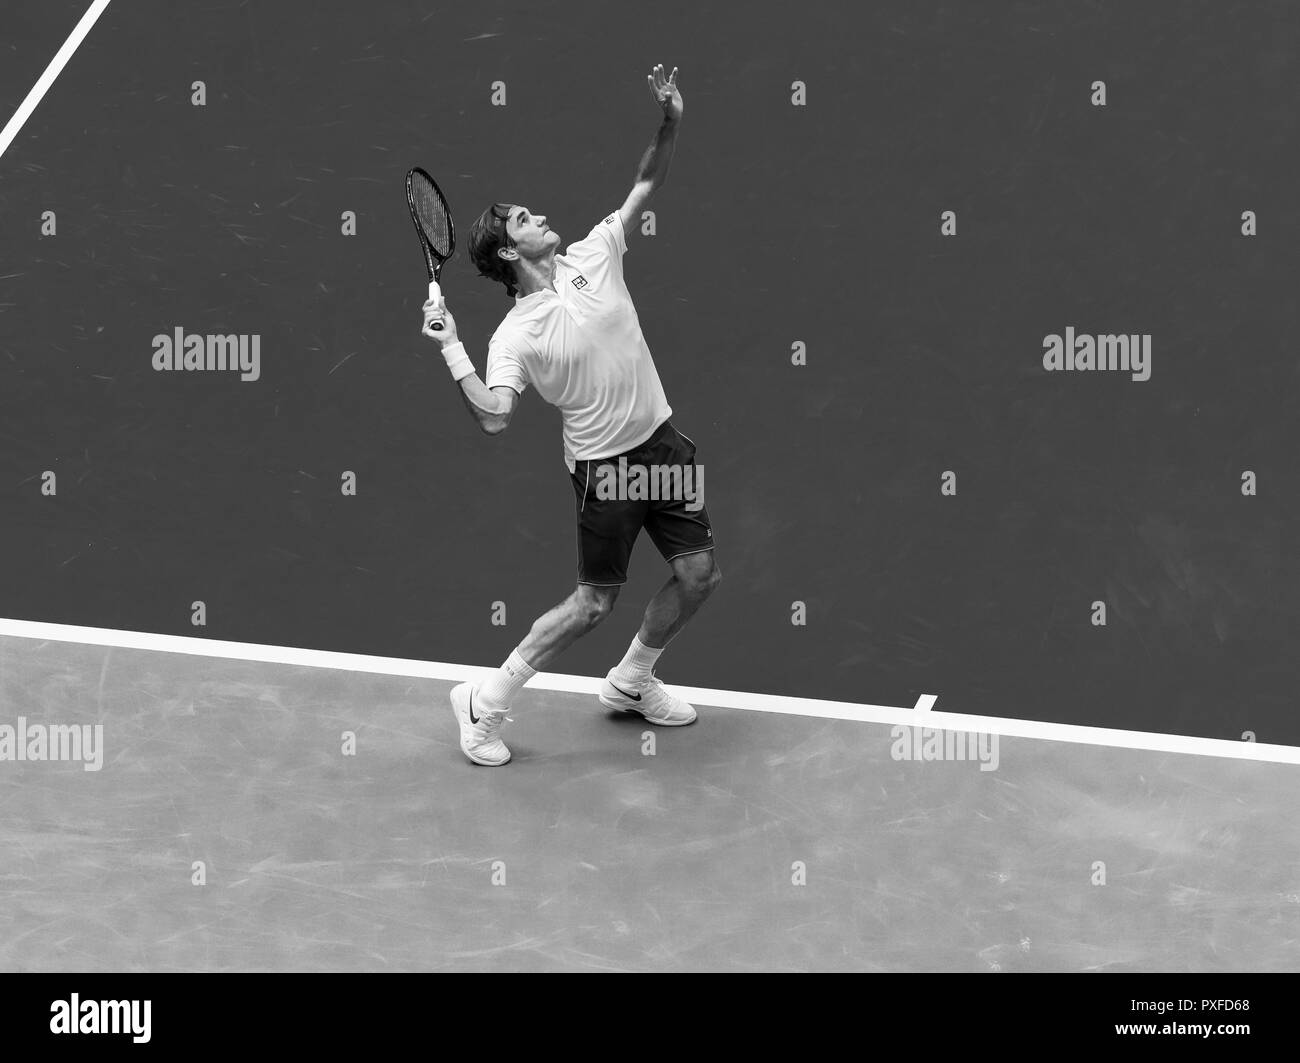 Roger Federer Black and White Stock Photos & Images - Alamy